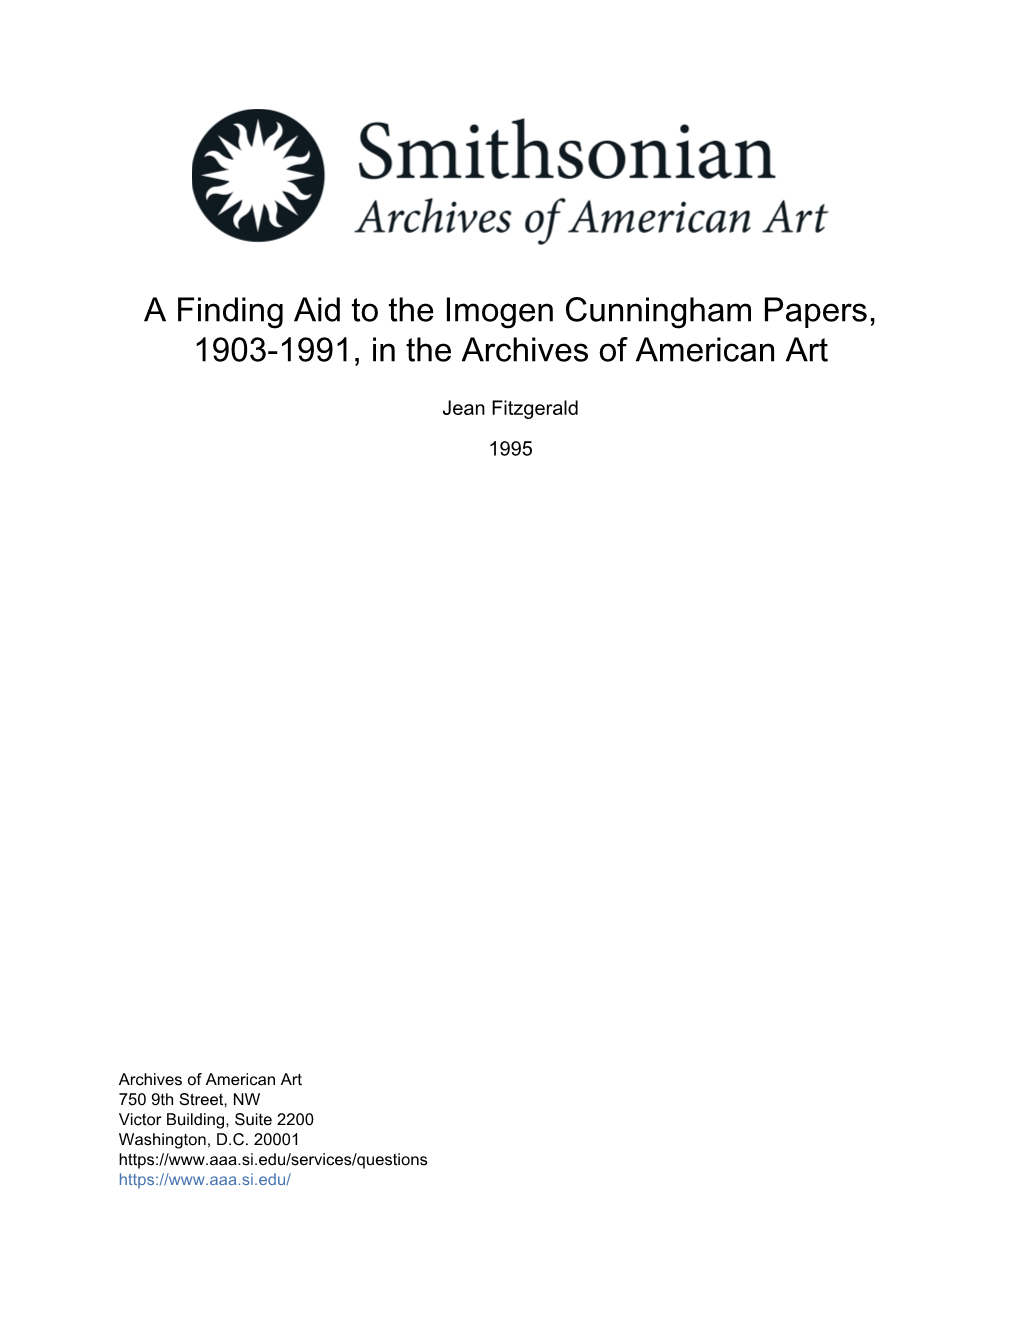 A Finding Aid to the Imogen Cunningham Papers, 1903-1991, in the Archives of American Art